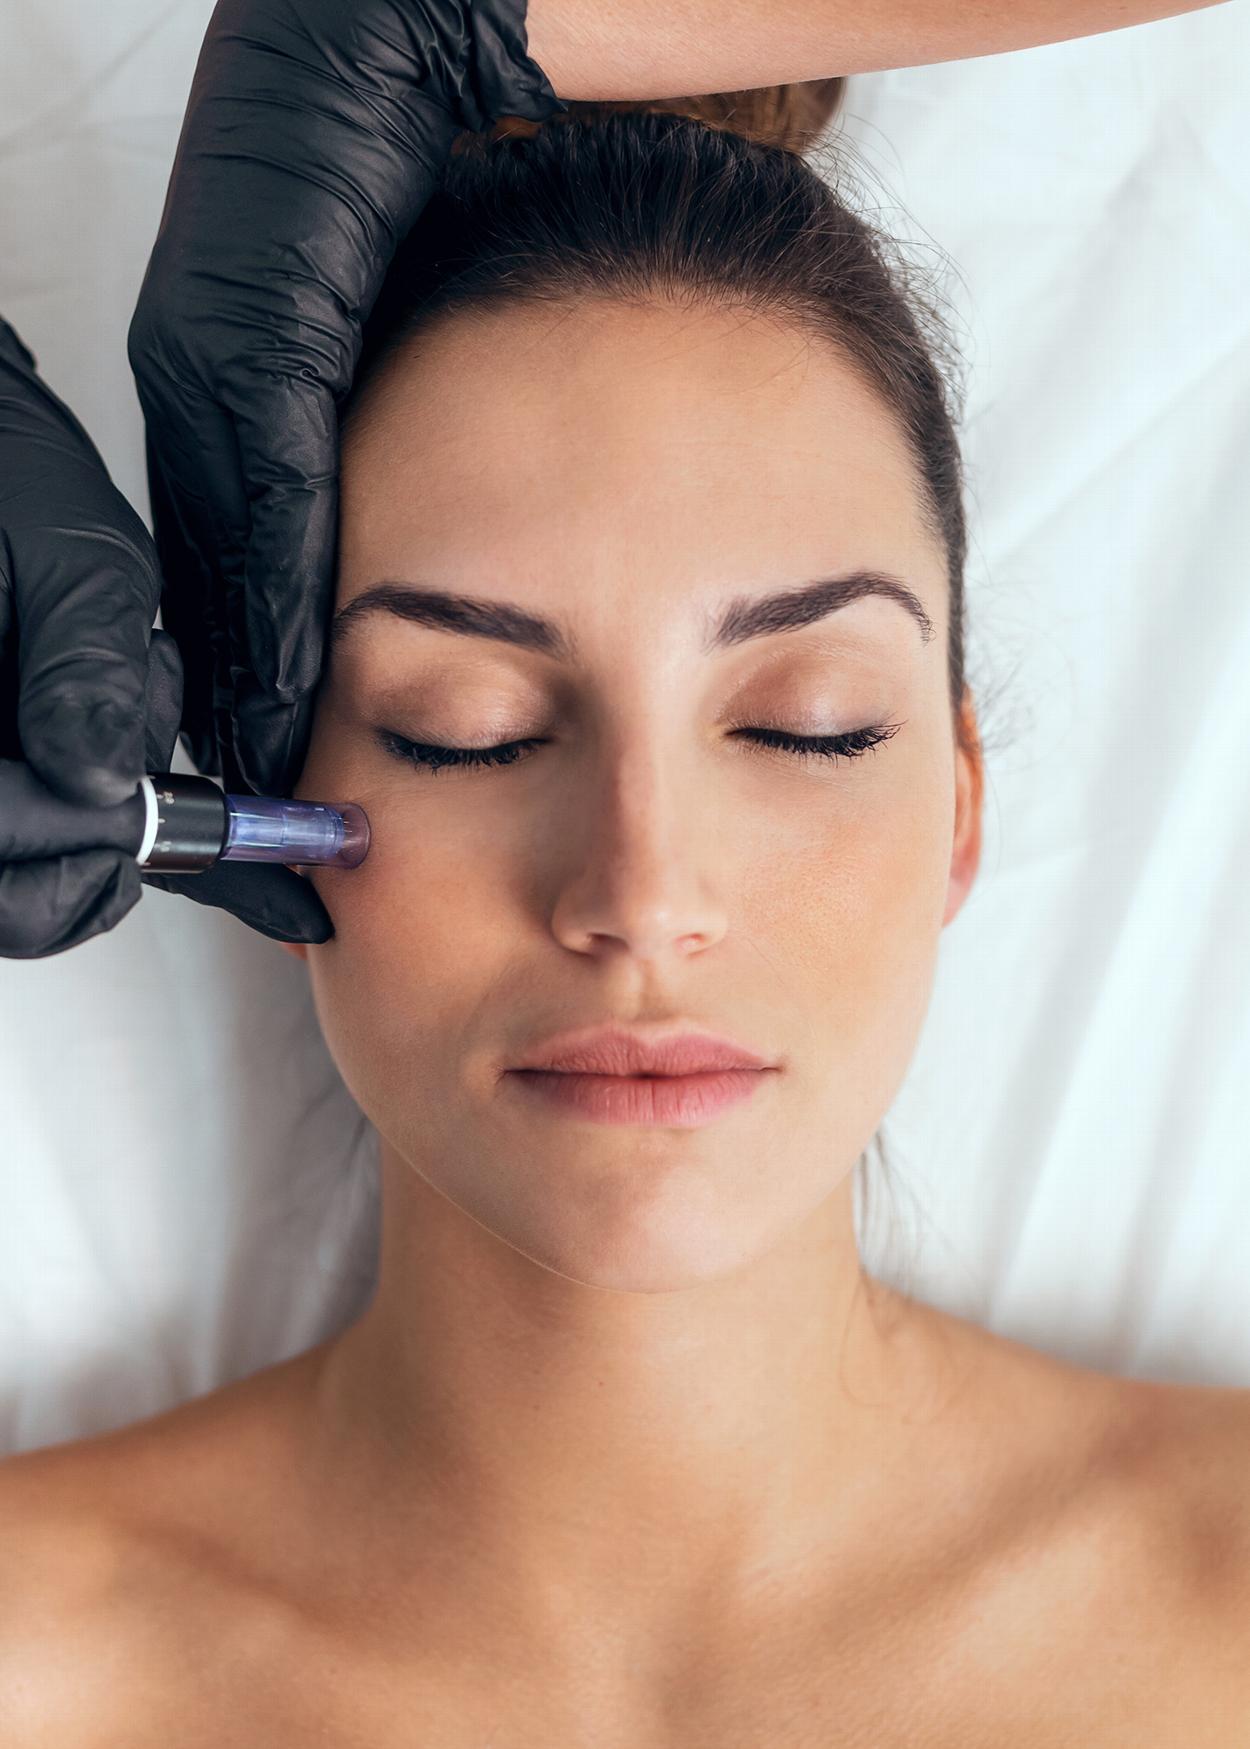 Woman receiving mesotherapy treatment